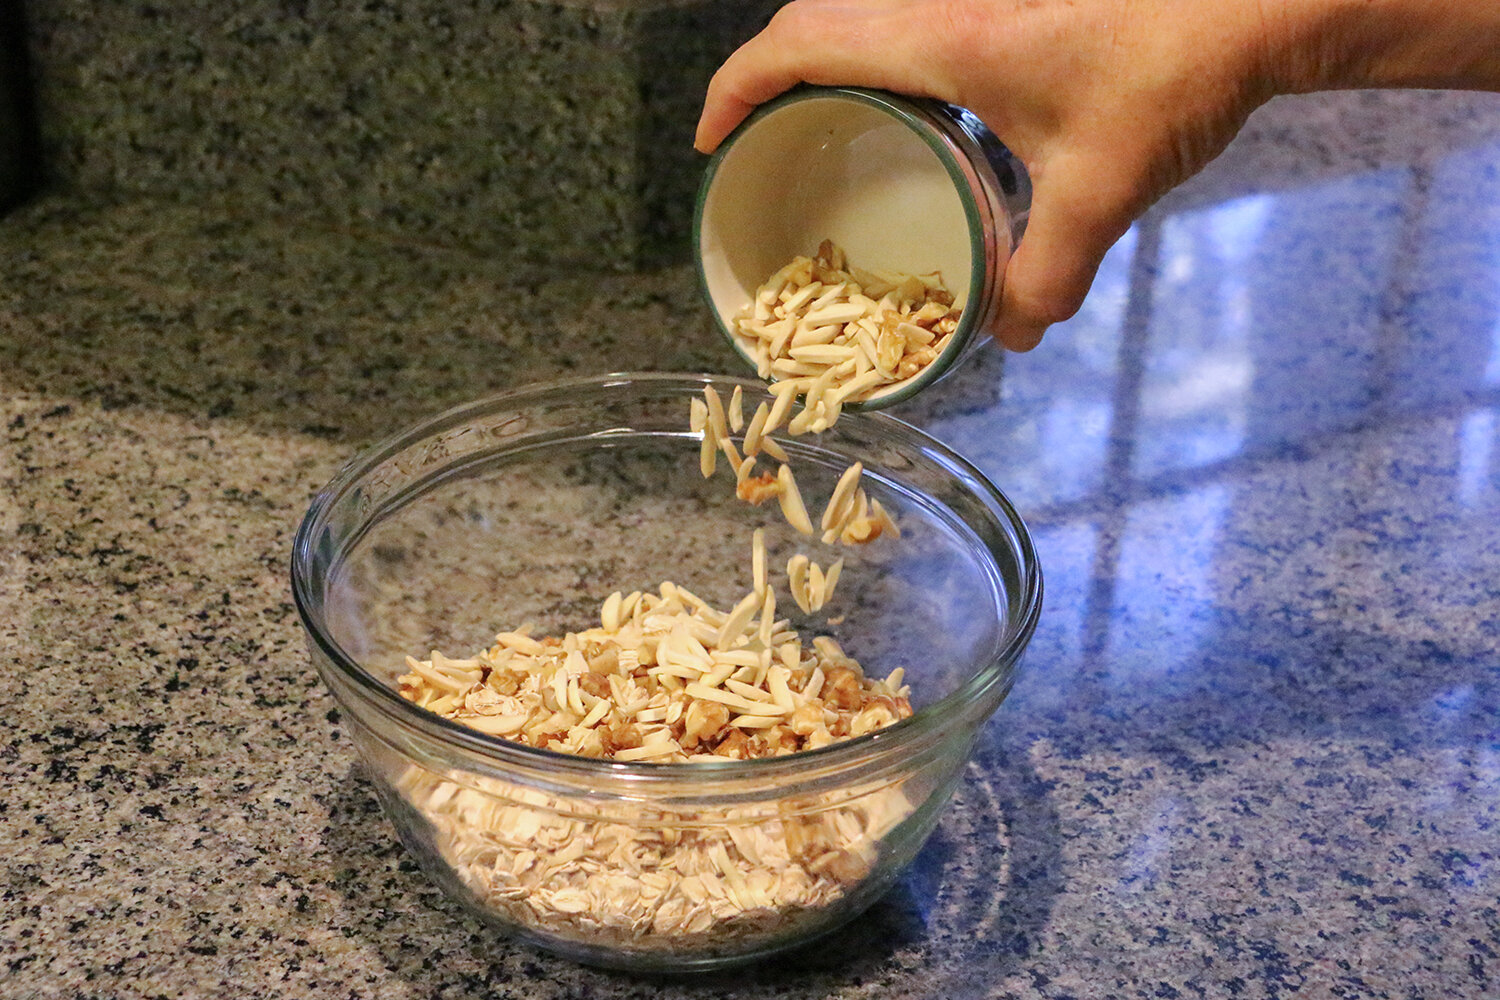 Adding in chopped nuts to rolled oats